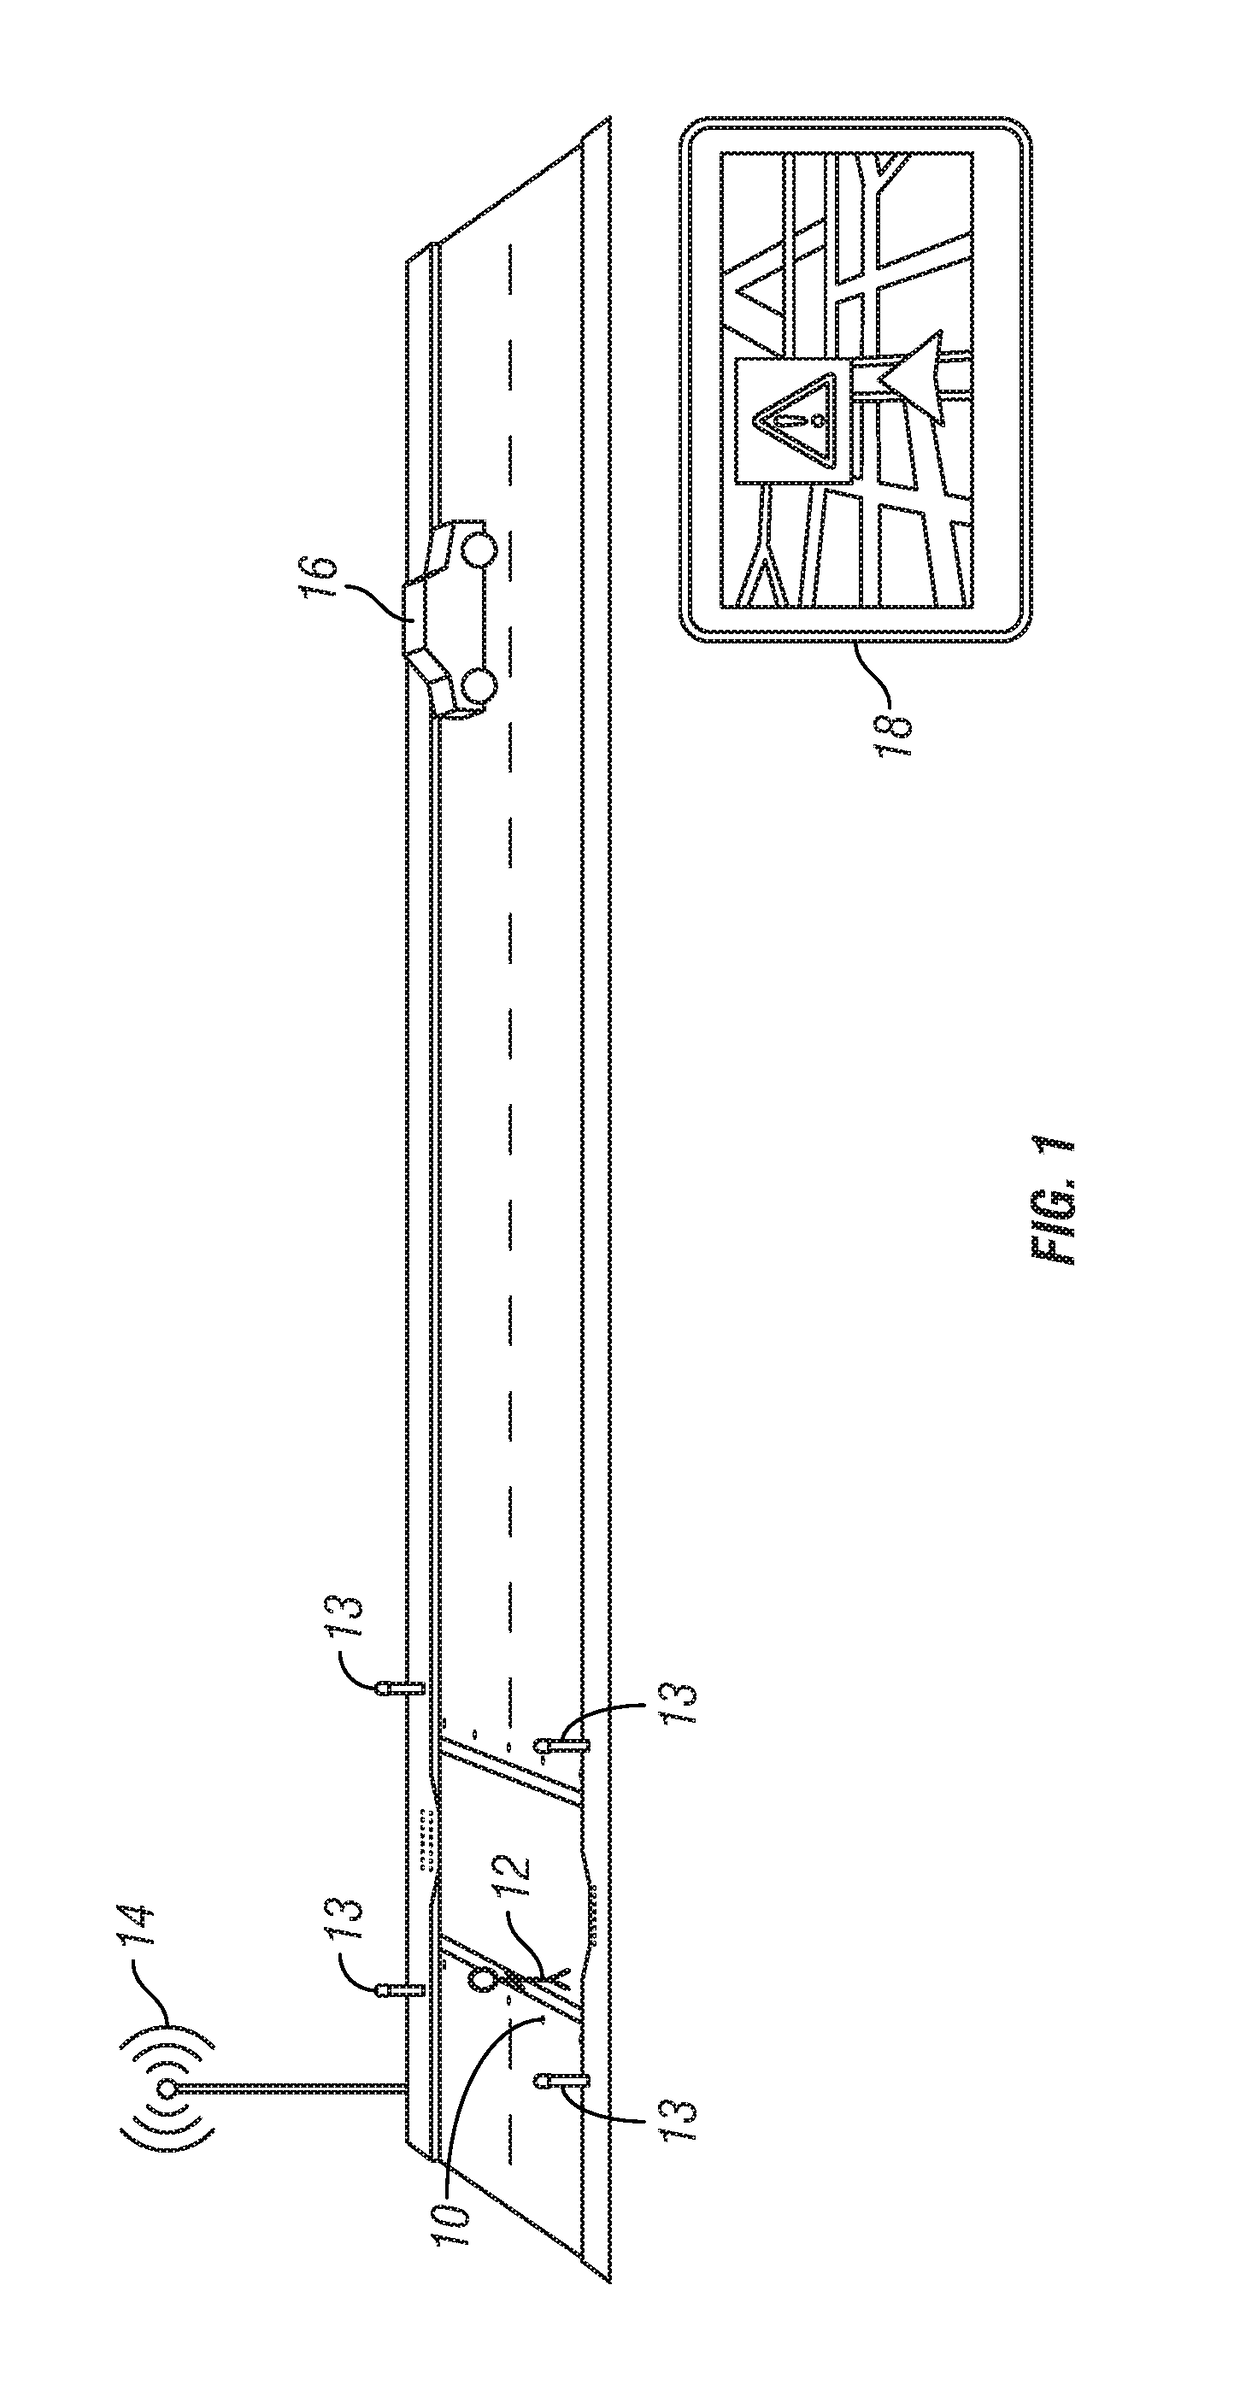 Method and apparatus for providing a proximity alert to the operator of a vehicle